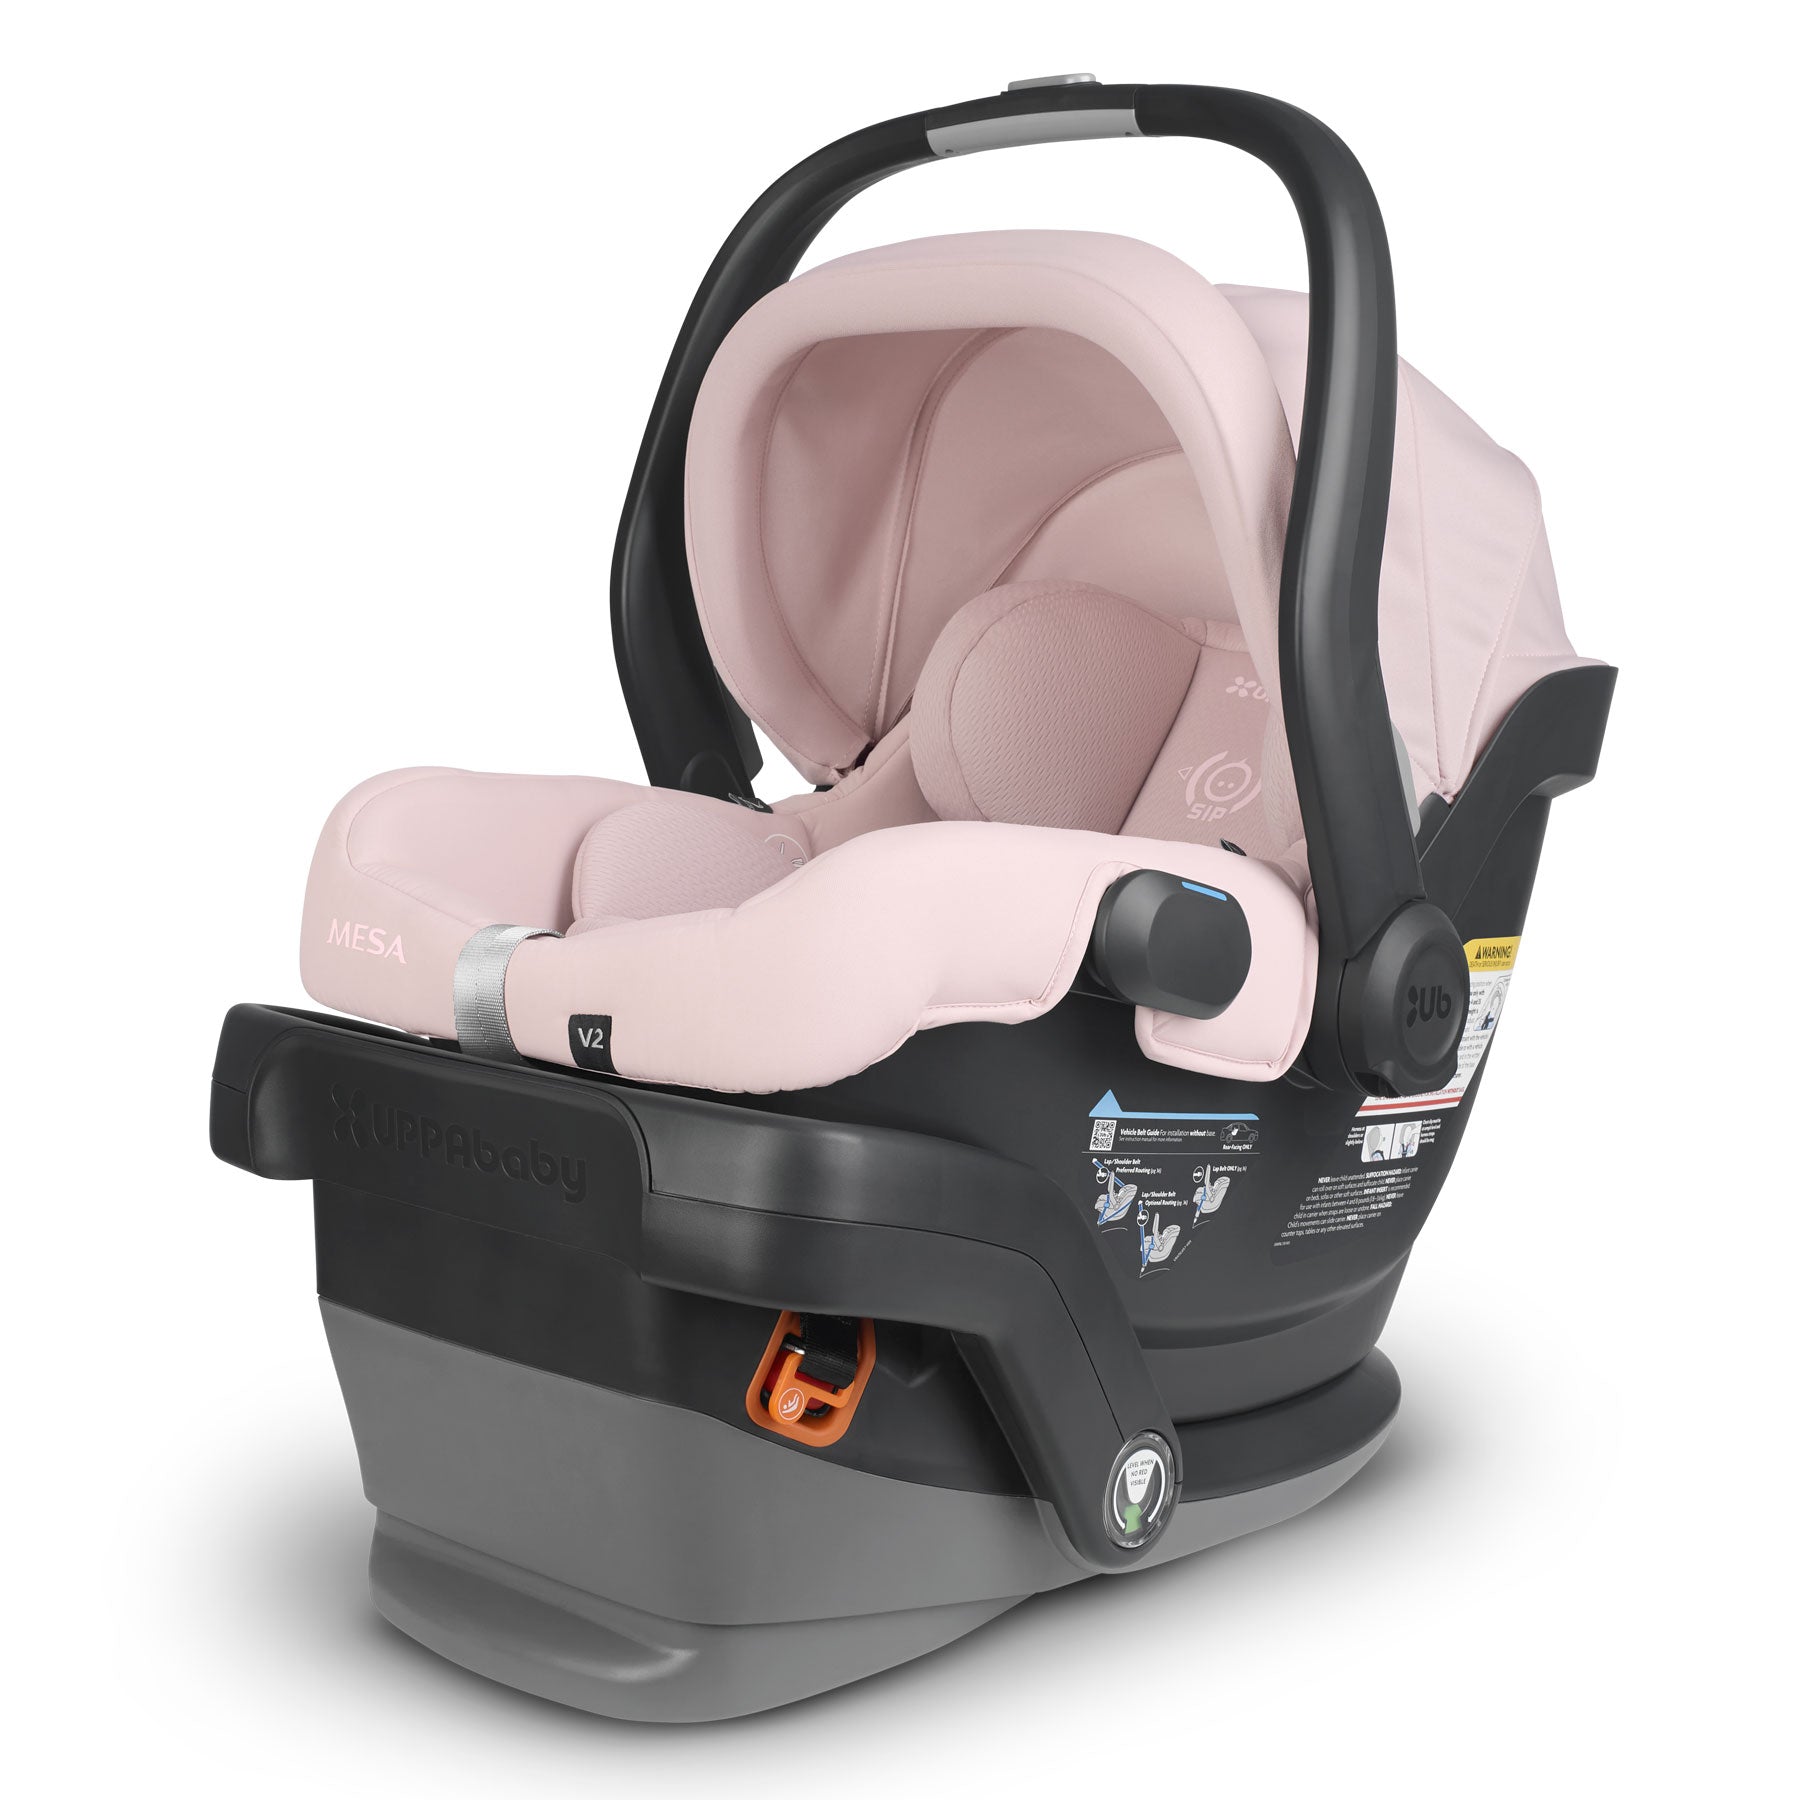 UPPAbaby MESA V2 Infant Car Seat - ALICE (Dusty Pink)